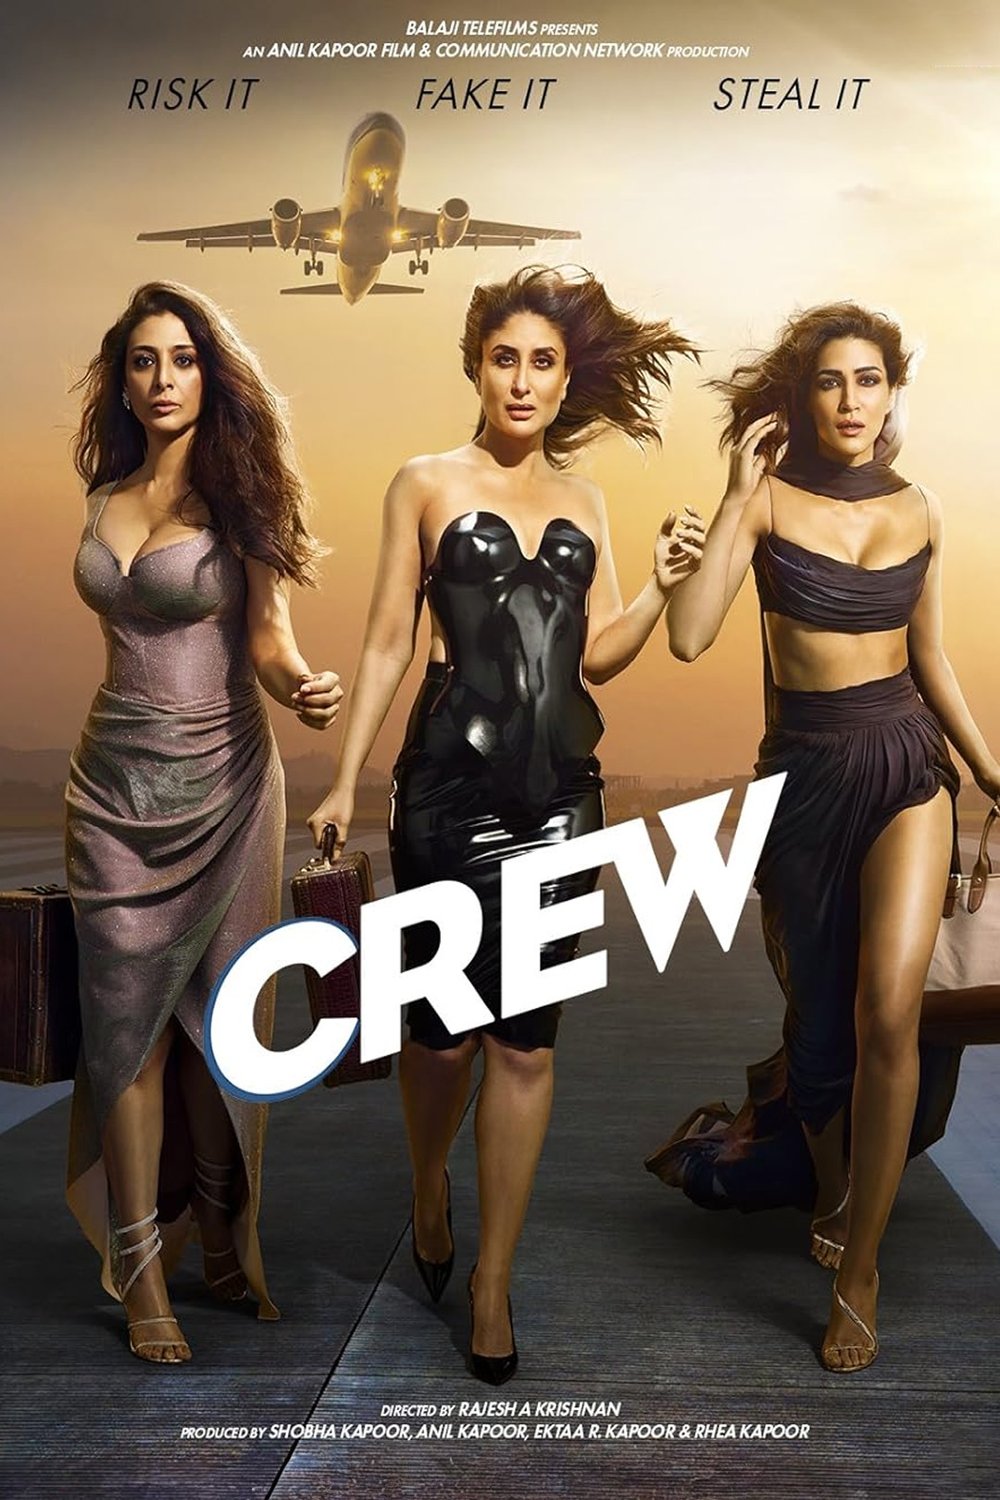 Hindi poster of the movie Crew